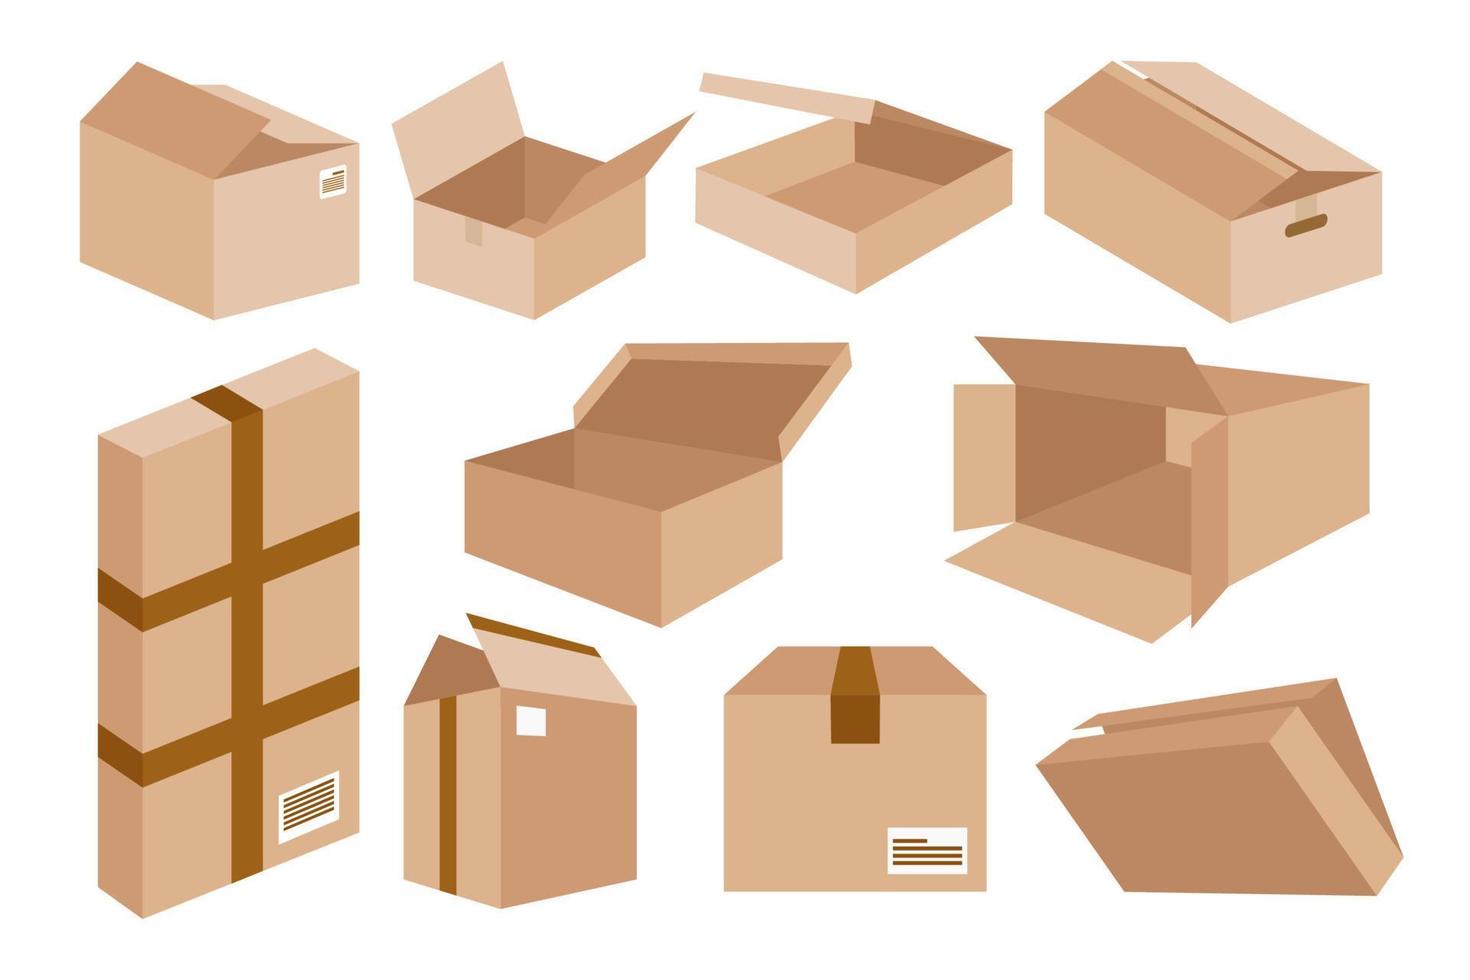 Carton delivery packaging open and closed box with fragile signs. Cardboard box empty cartoon delivery cargo, receive packaging distribution vector